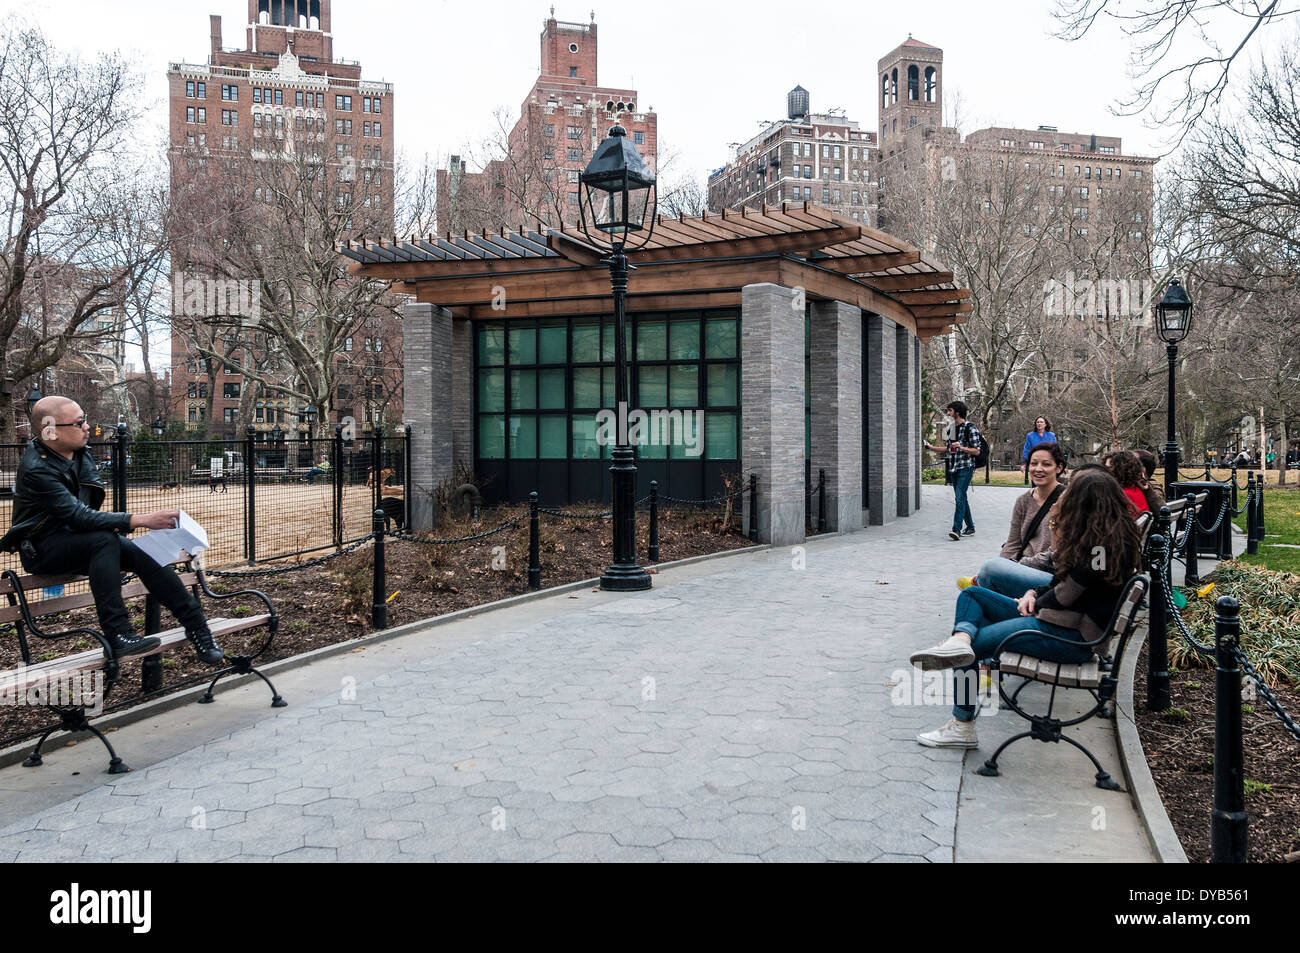 New York, NY - 10 April 2014 - Newly completed Comfort Station and Police Station in Washington Square Park ©Stacy Walsh Rosenstock/Alamy Stock Photo